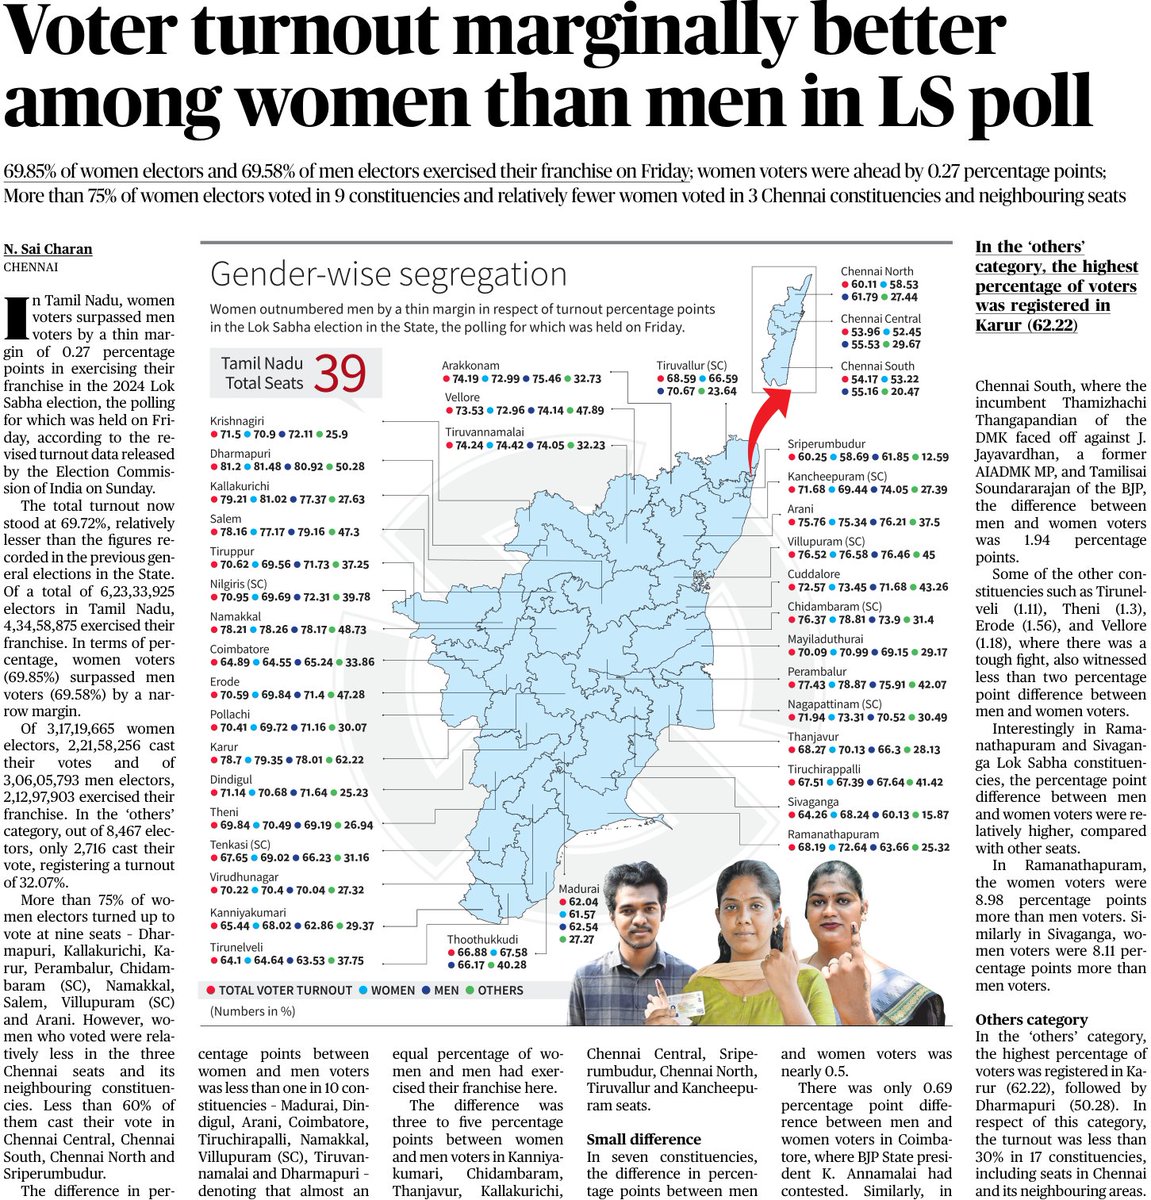 Voter turnout marginally better among women than men in the Lok Sabha polls in the State held on Friday. Women voters were eight percentage points higher than men voters in Ramanathapuram and Sivaganga.